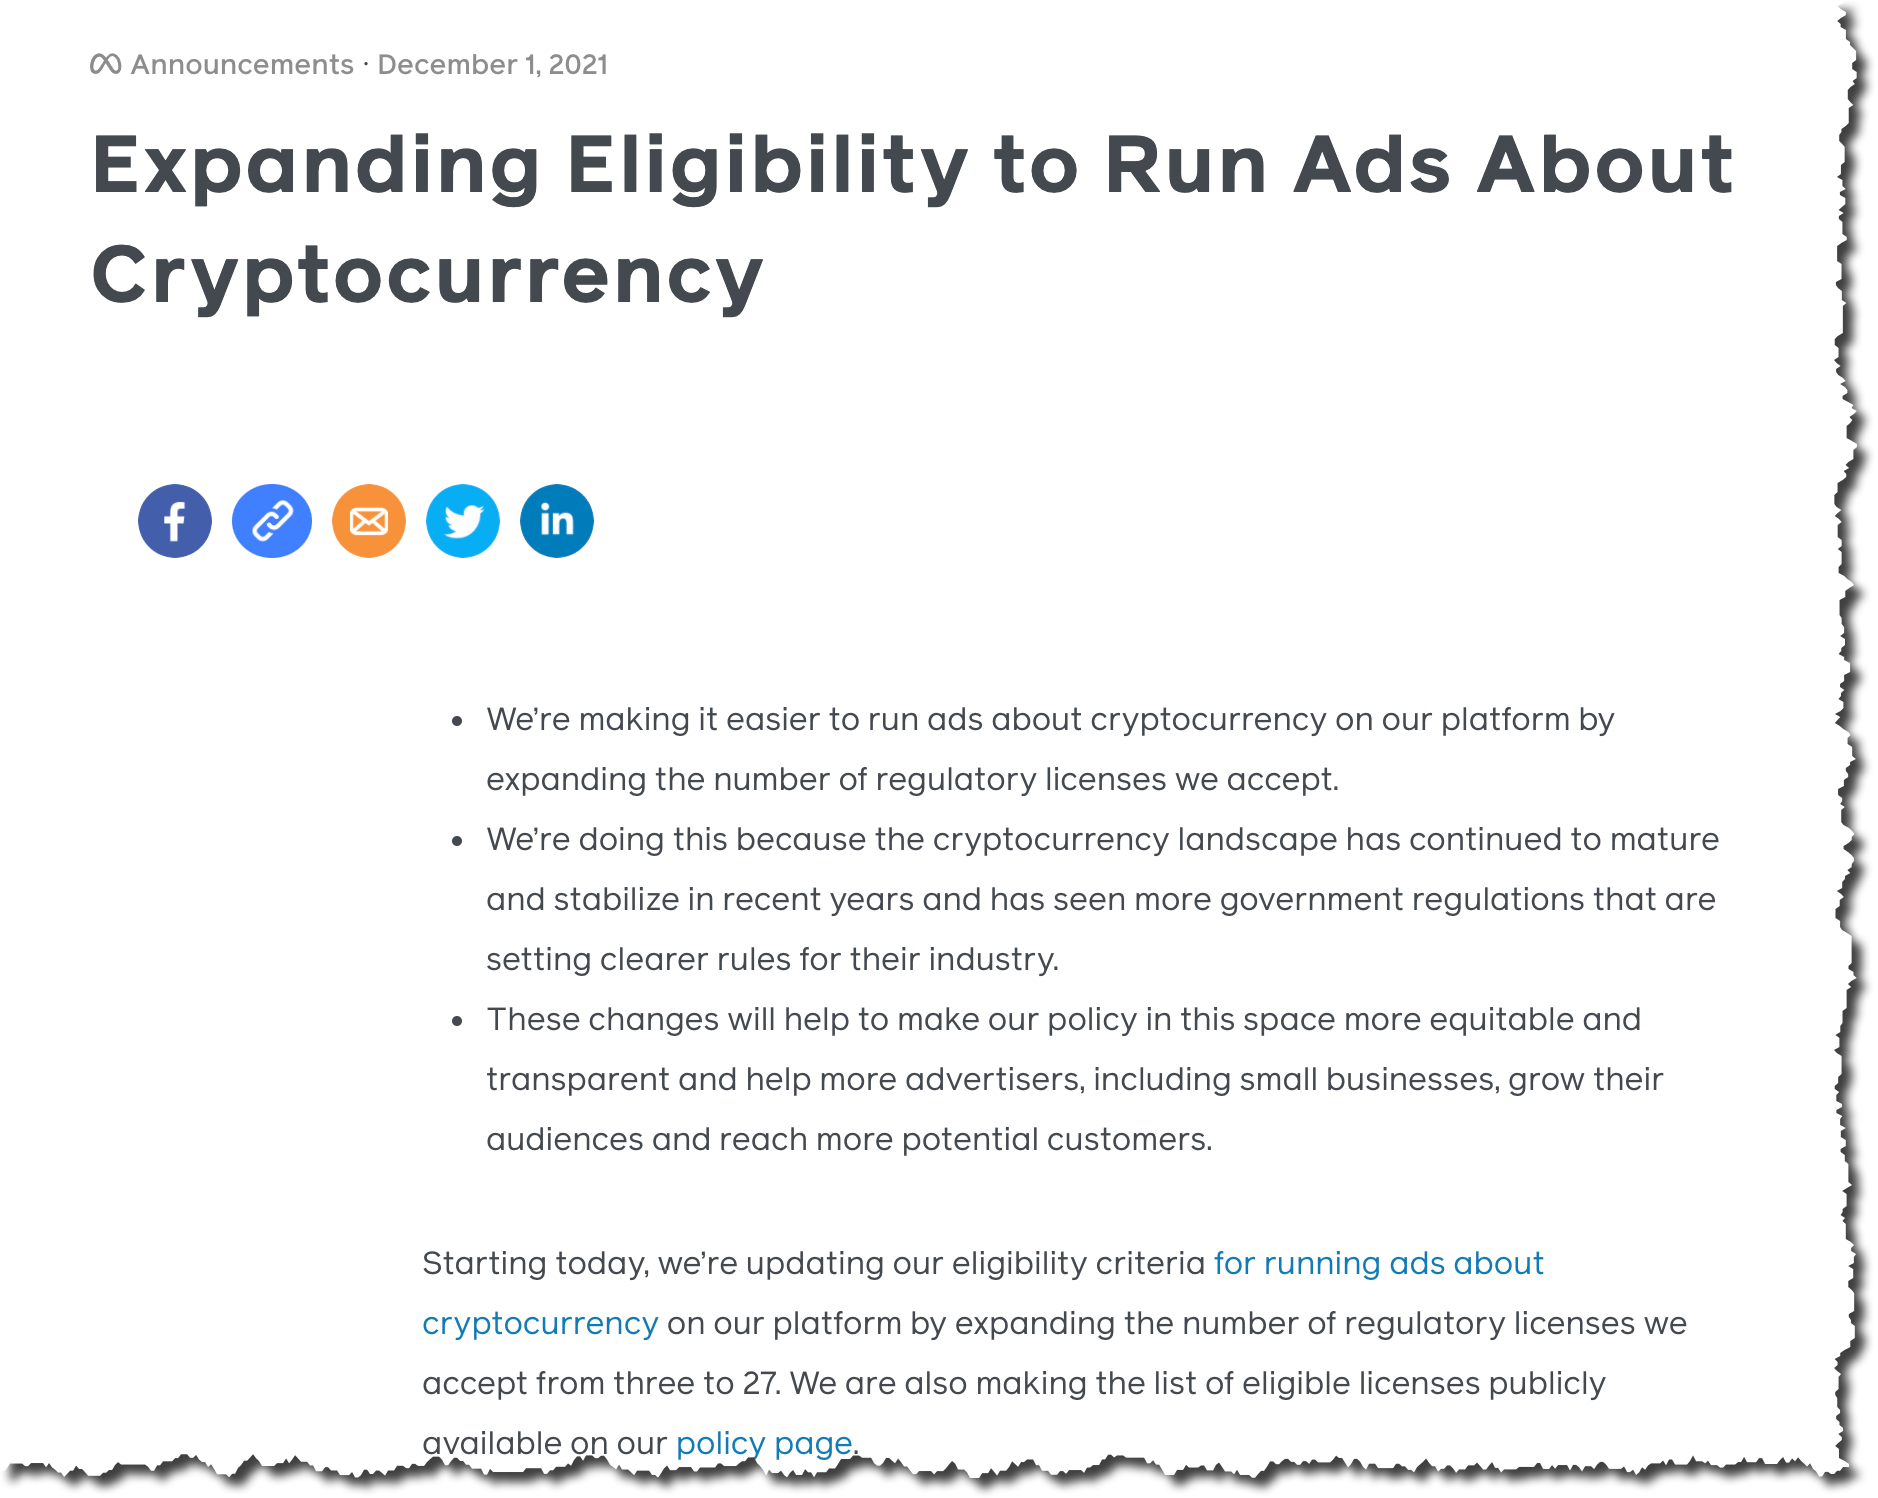 @brianoflondon/facebook-admits-guilt-and-the-press-confirm-how-damaging-the-crypto-ad-ban-really-was